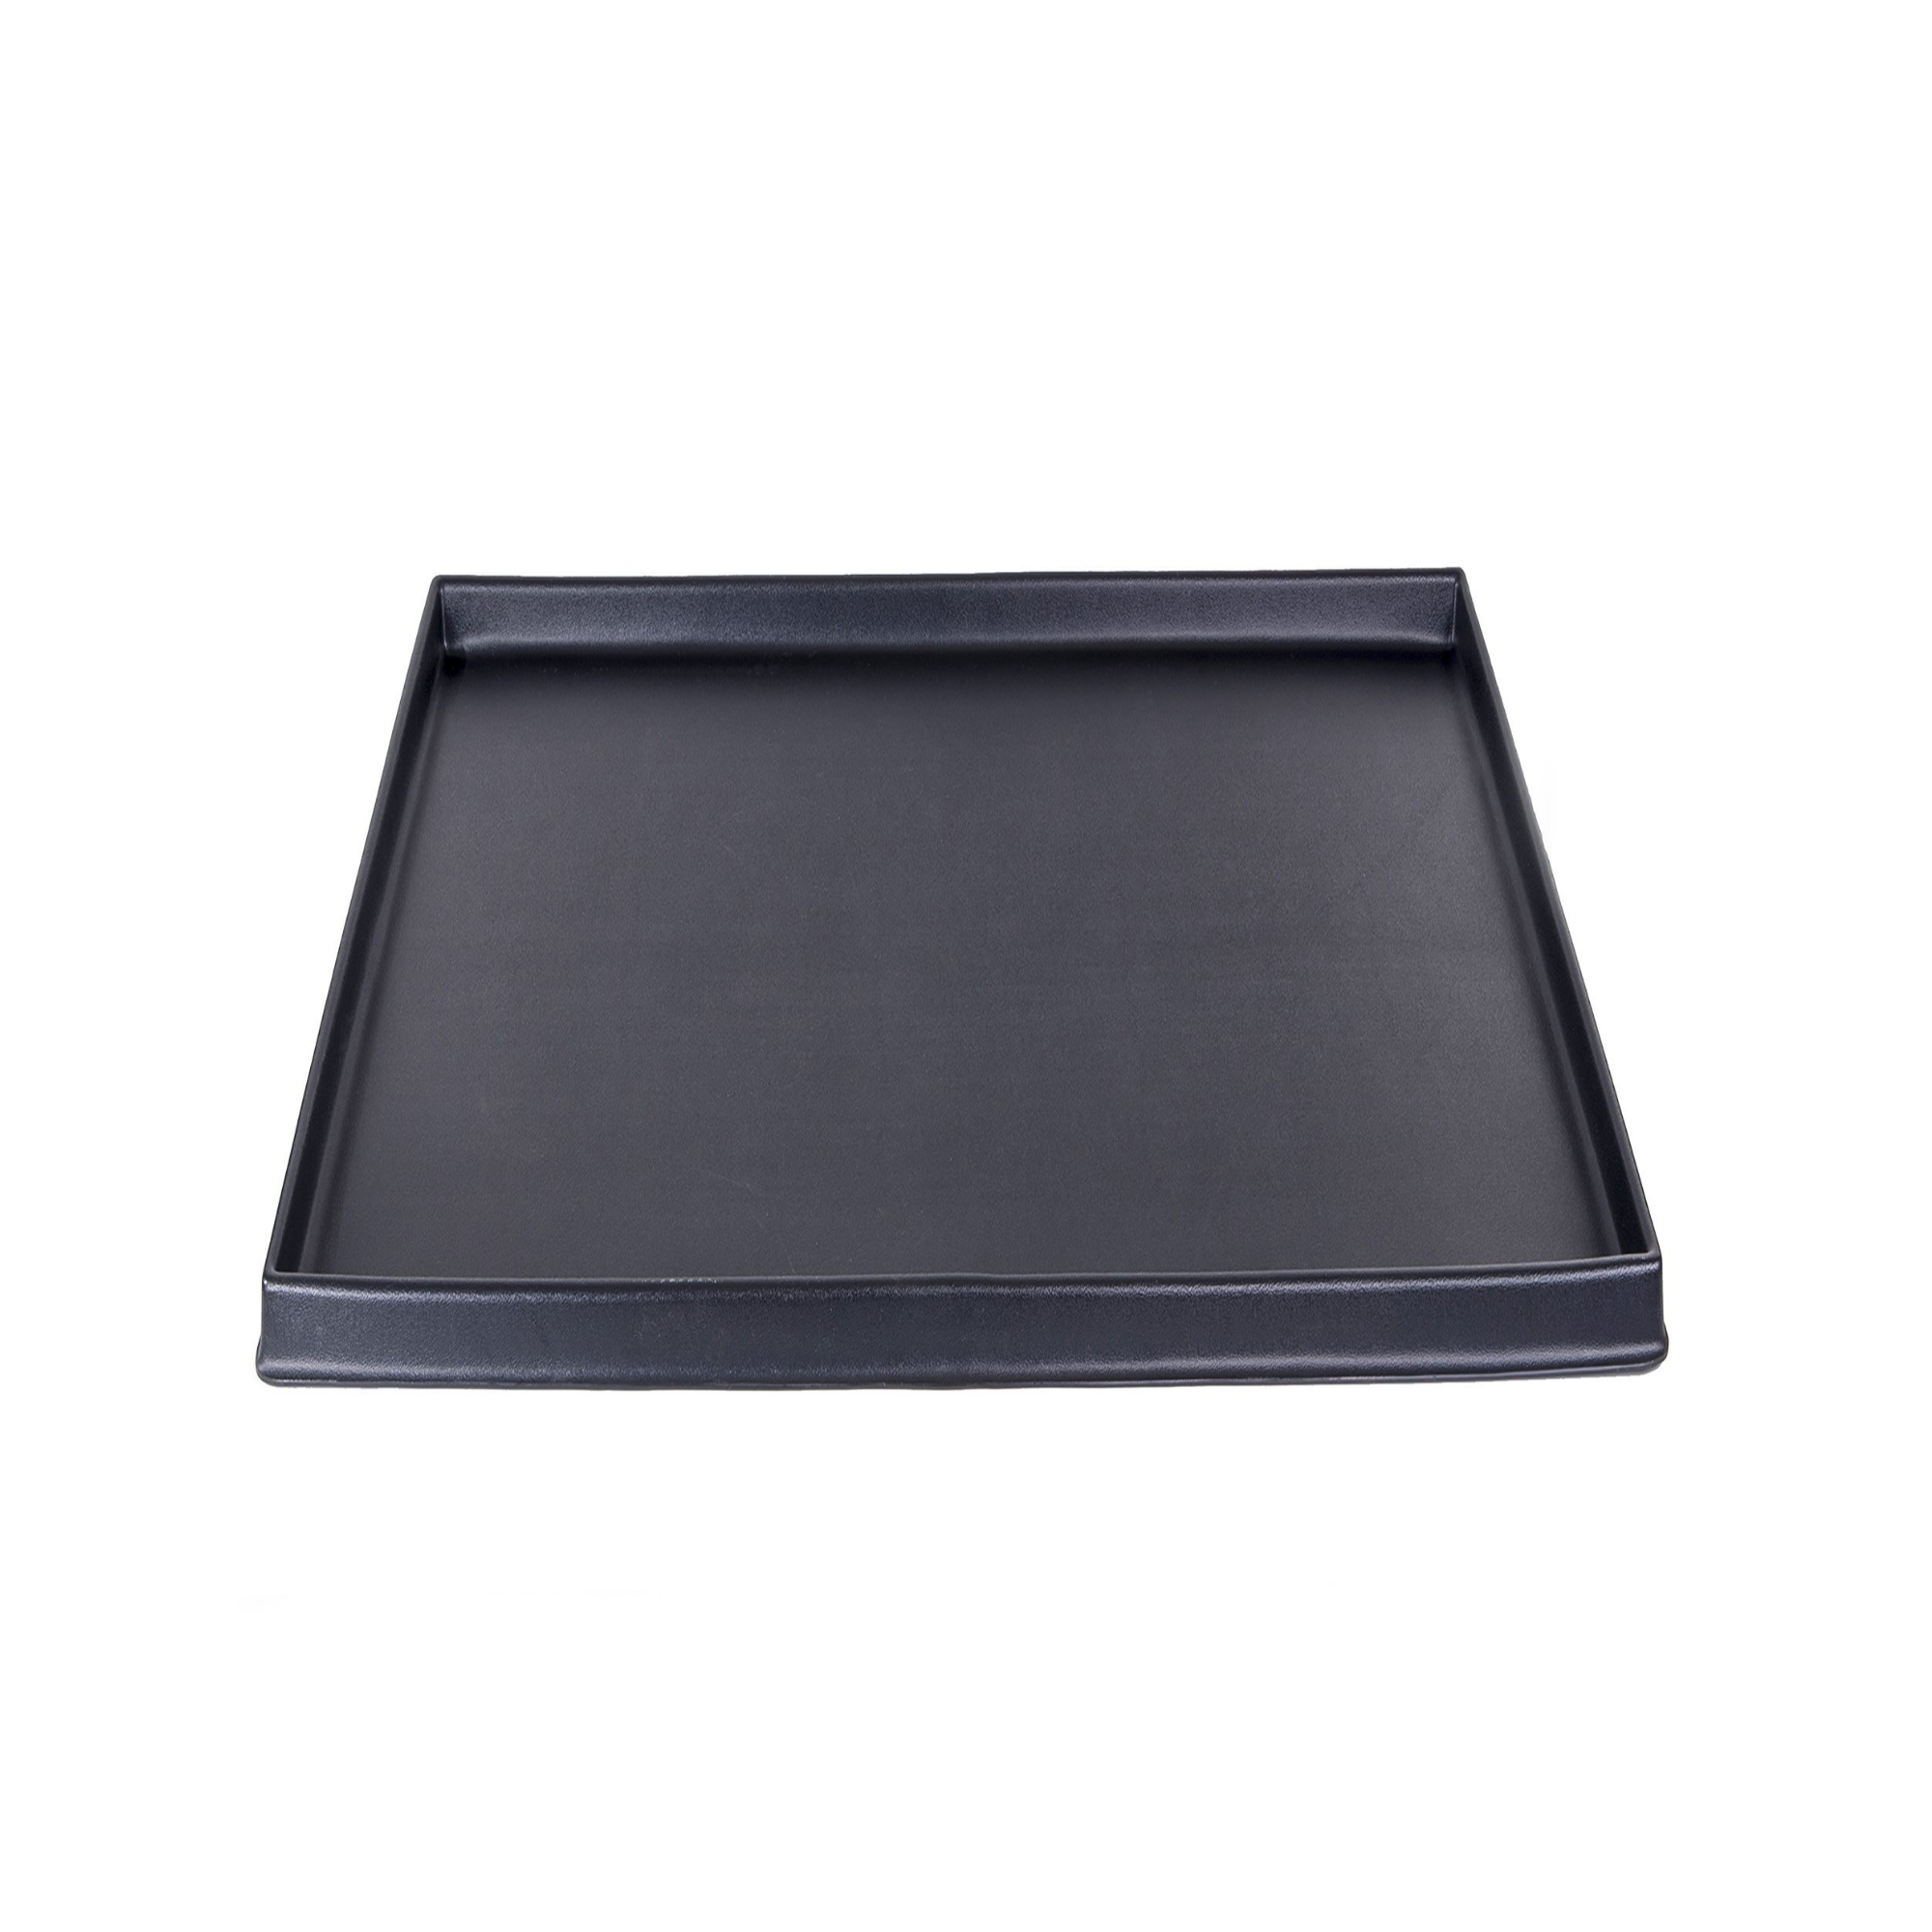 Large Size P Tray for Fresh Patch Grass